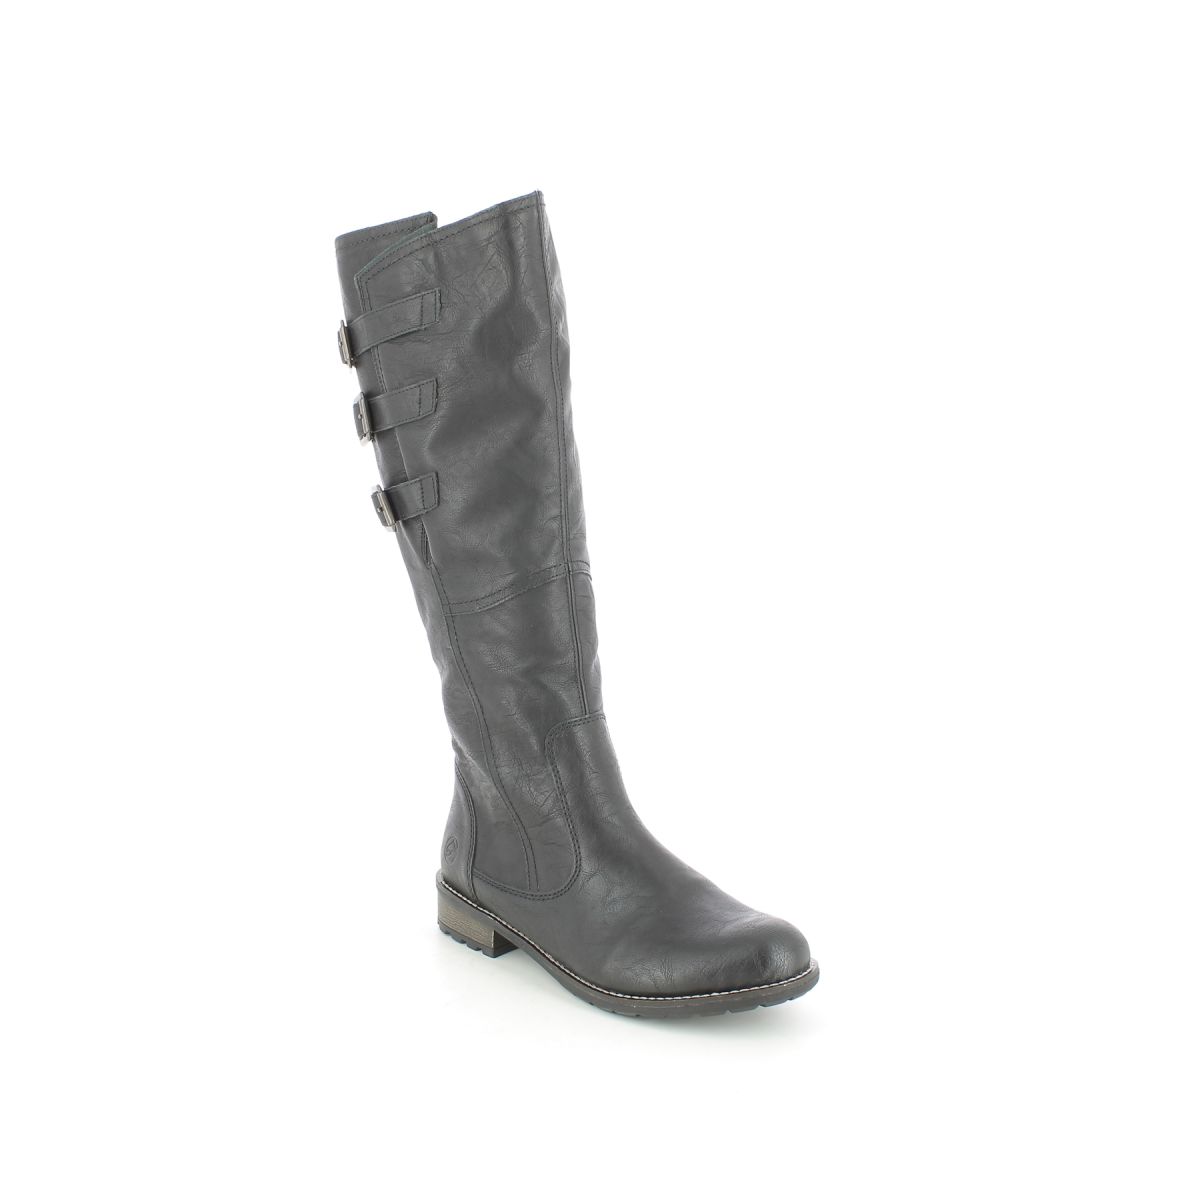 Remonte Shebuc Wide-Leg Black Womens Knee-High Boots R3370-01 In Size 39 In Plain Black